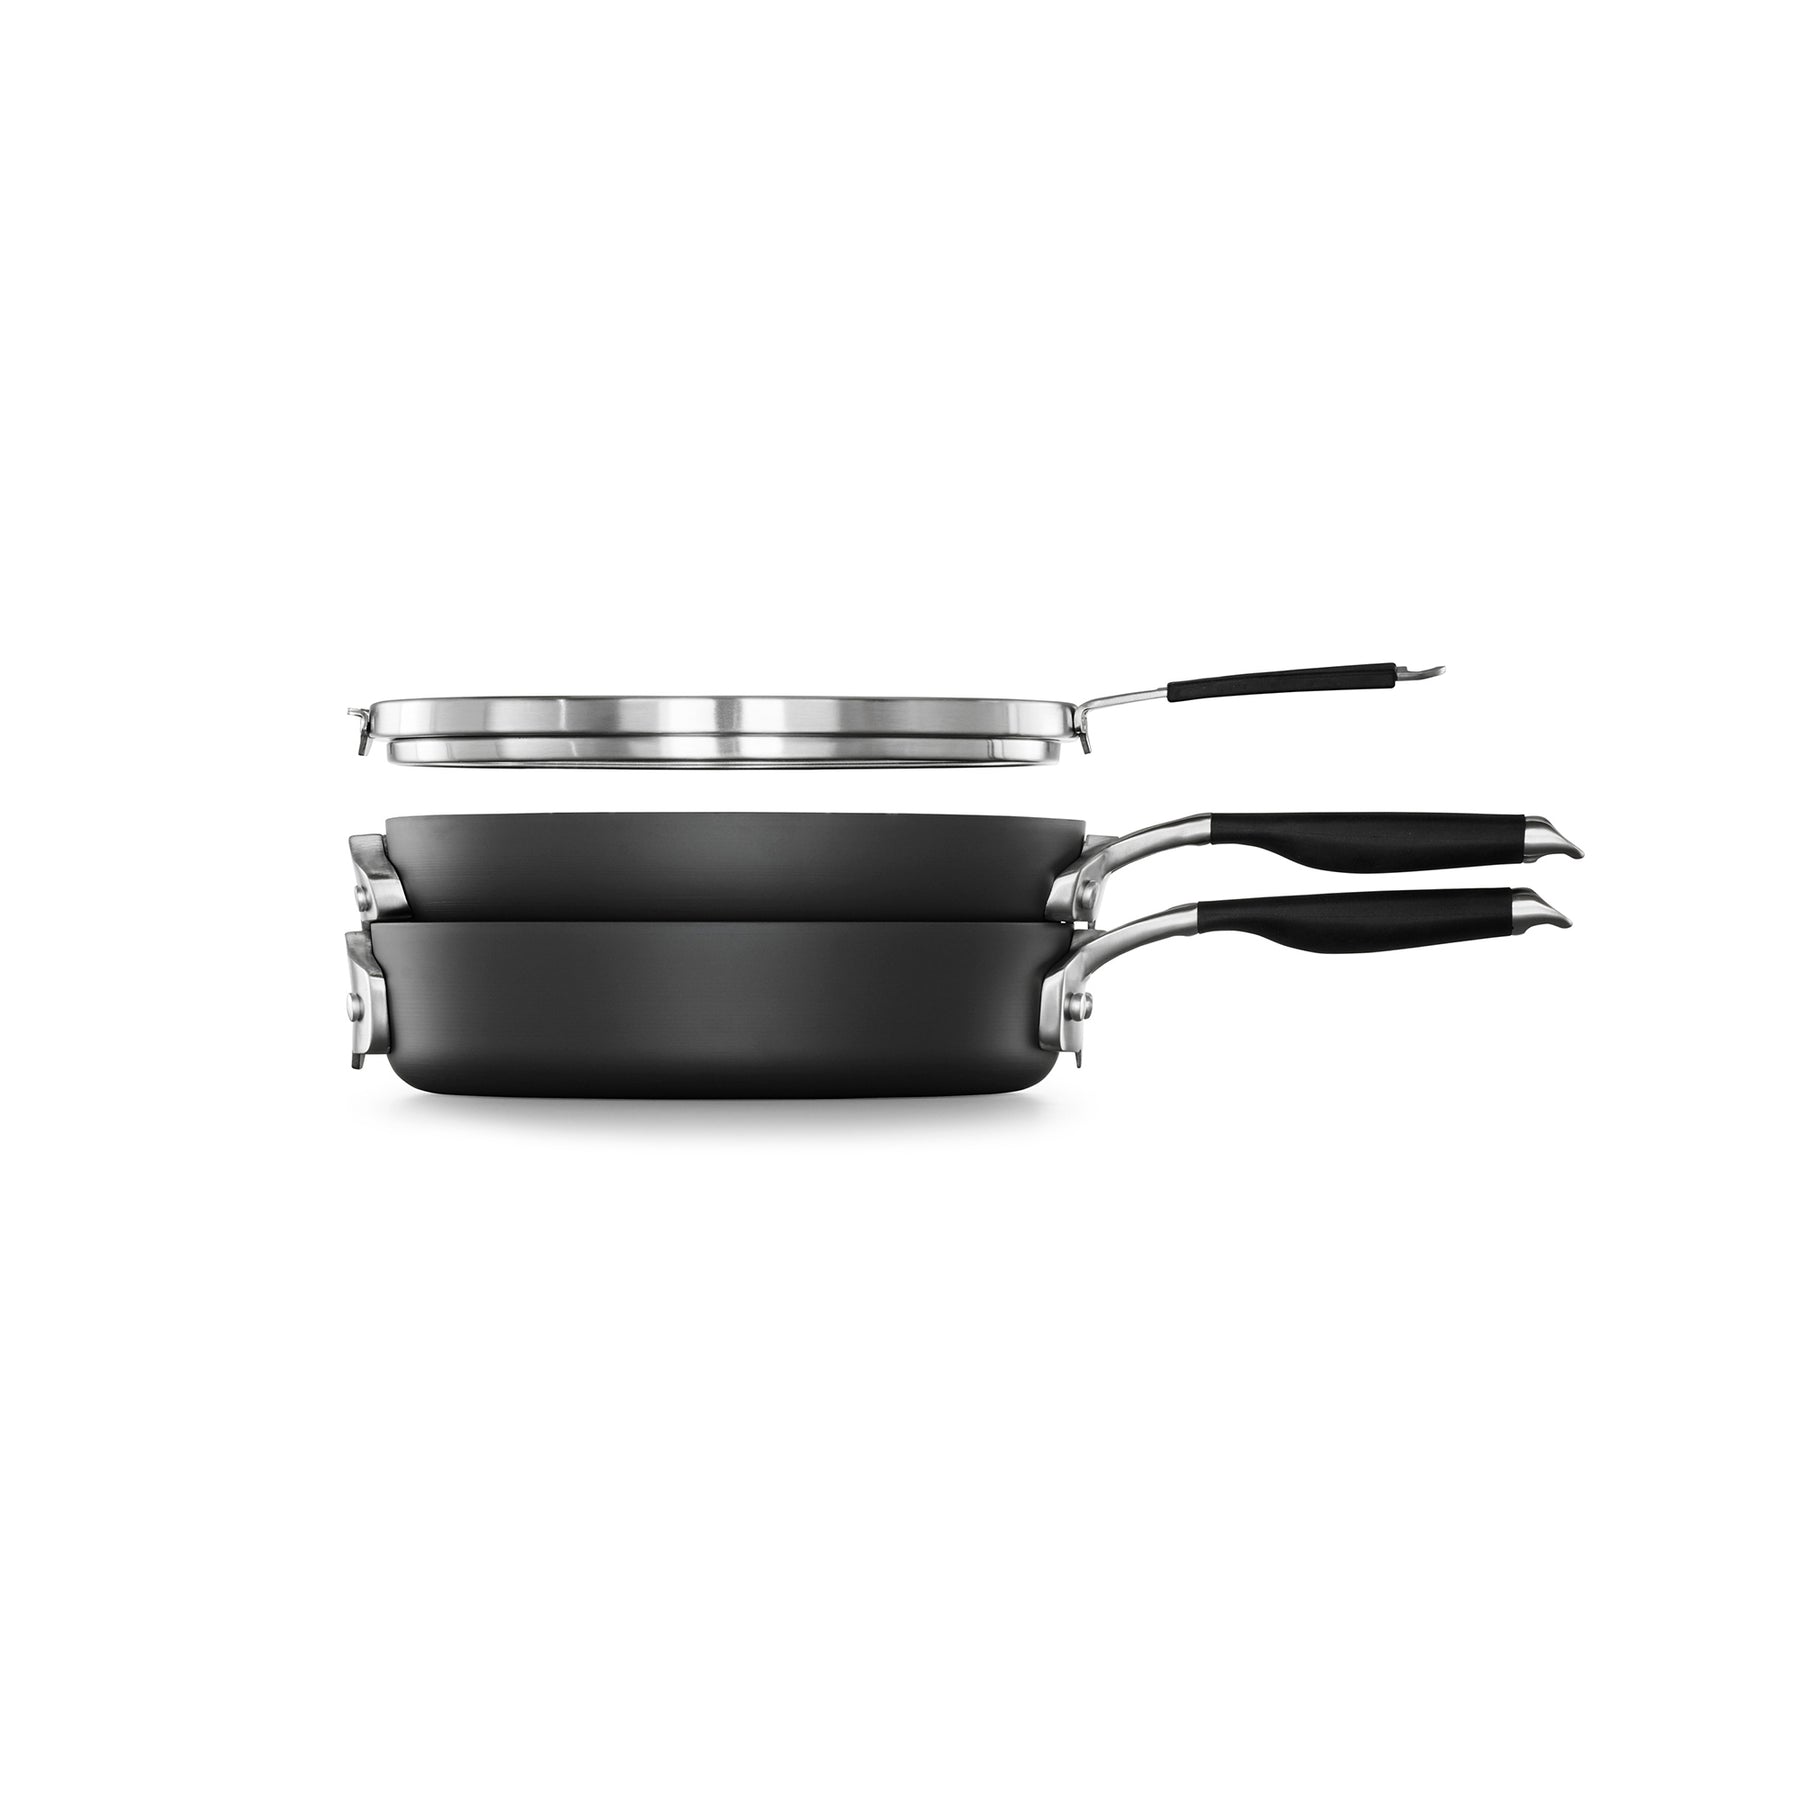 Select by Calphalon Hard-Anodized Nonstick 8-Inch Fry Pan with